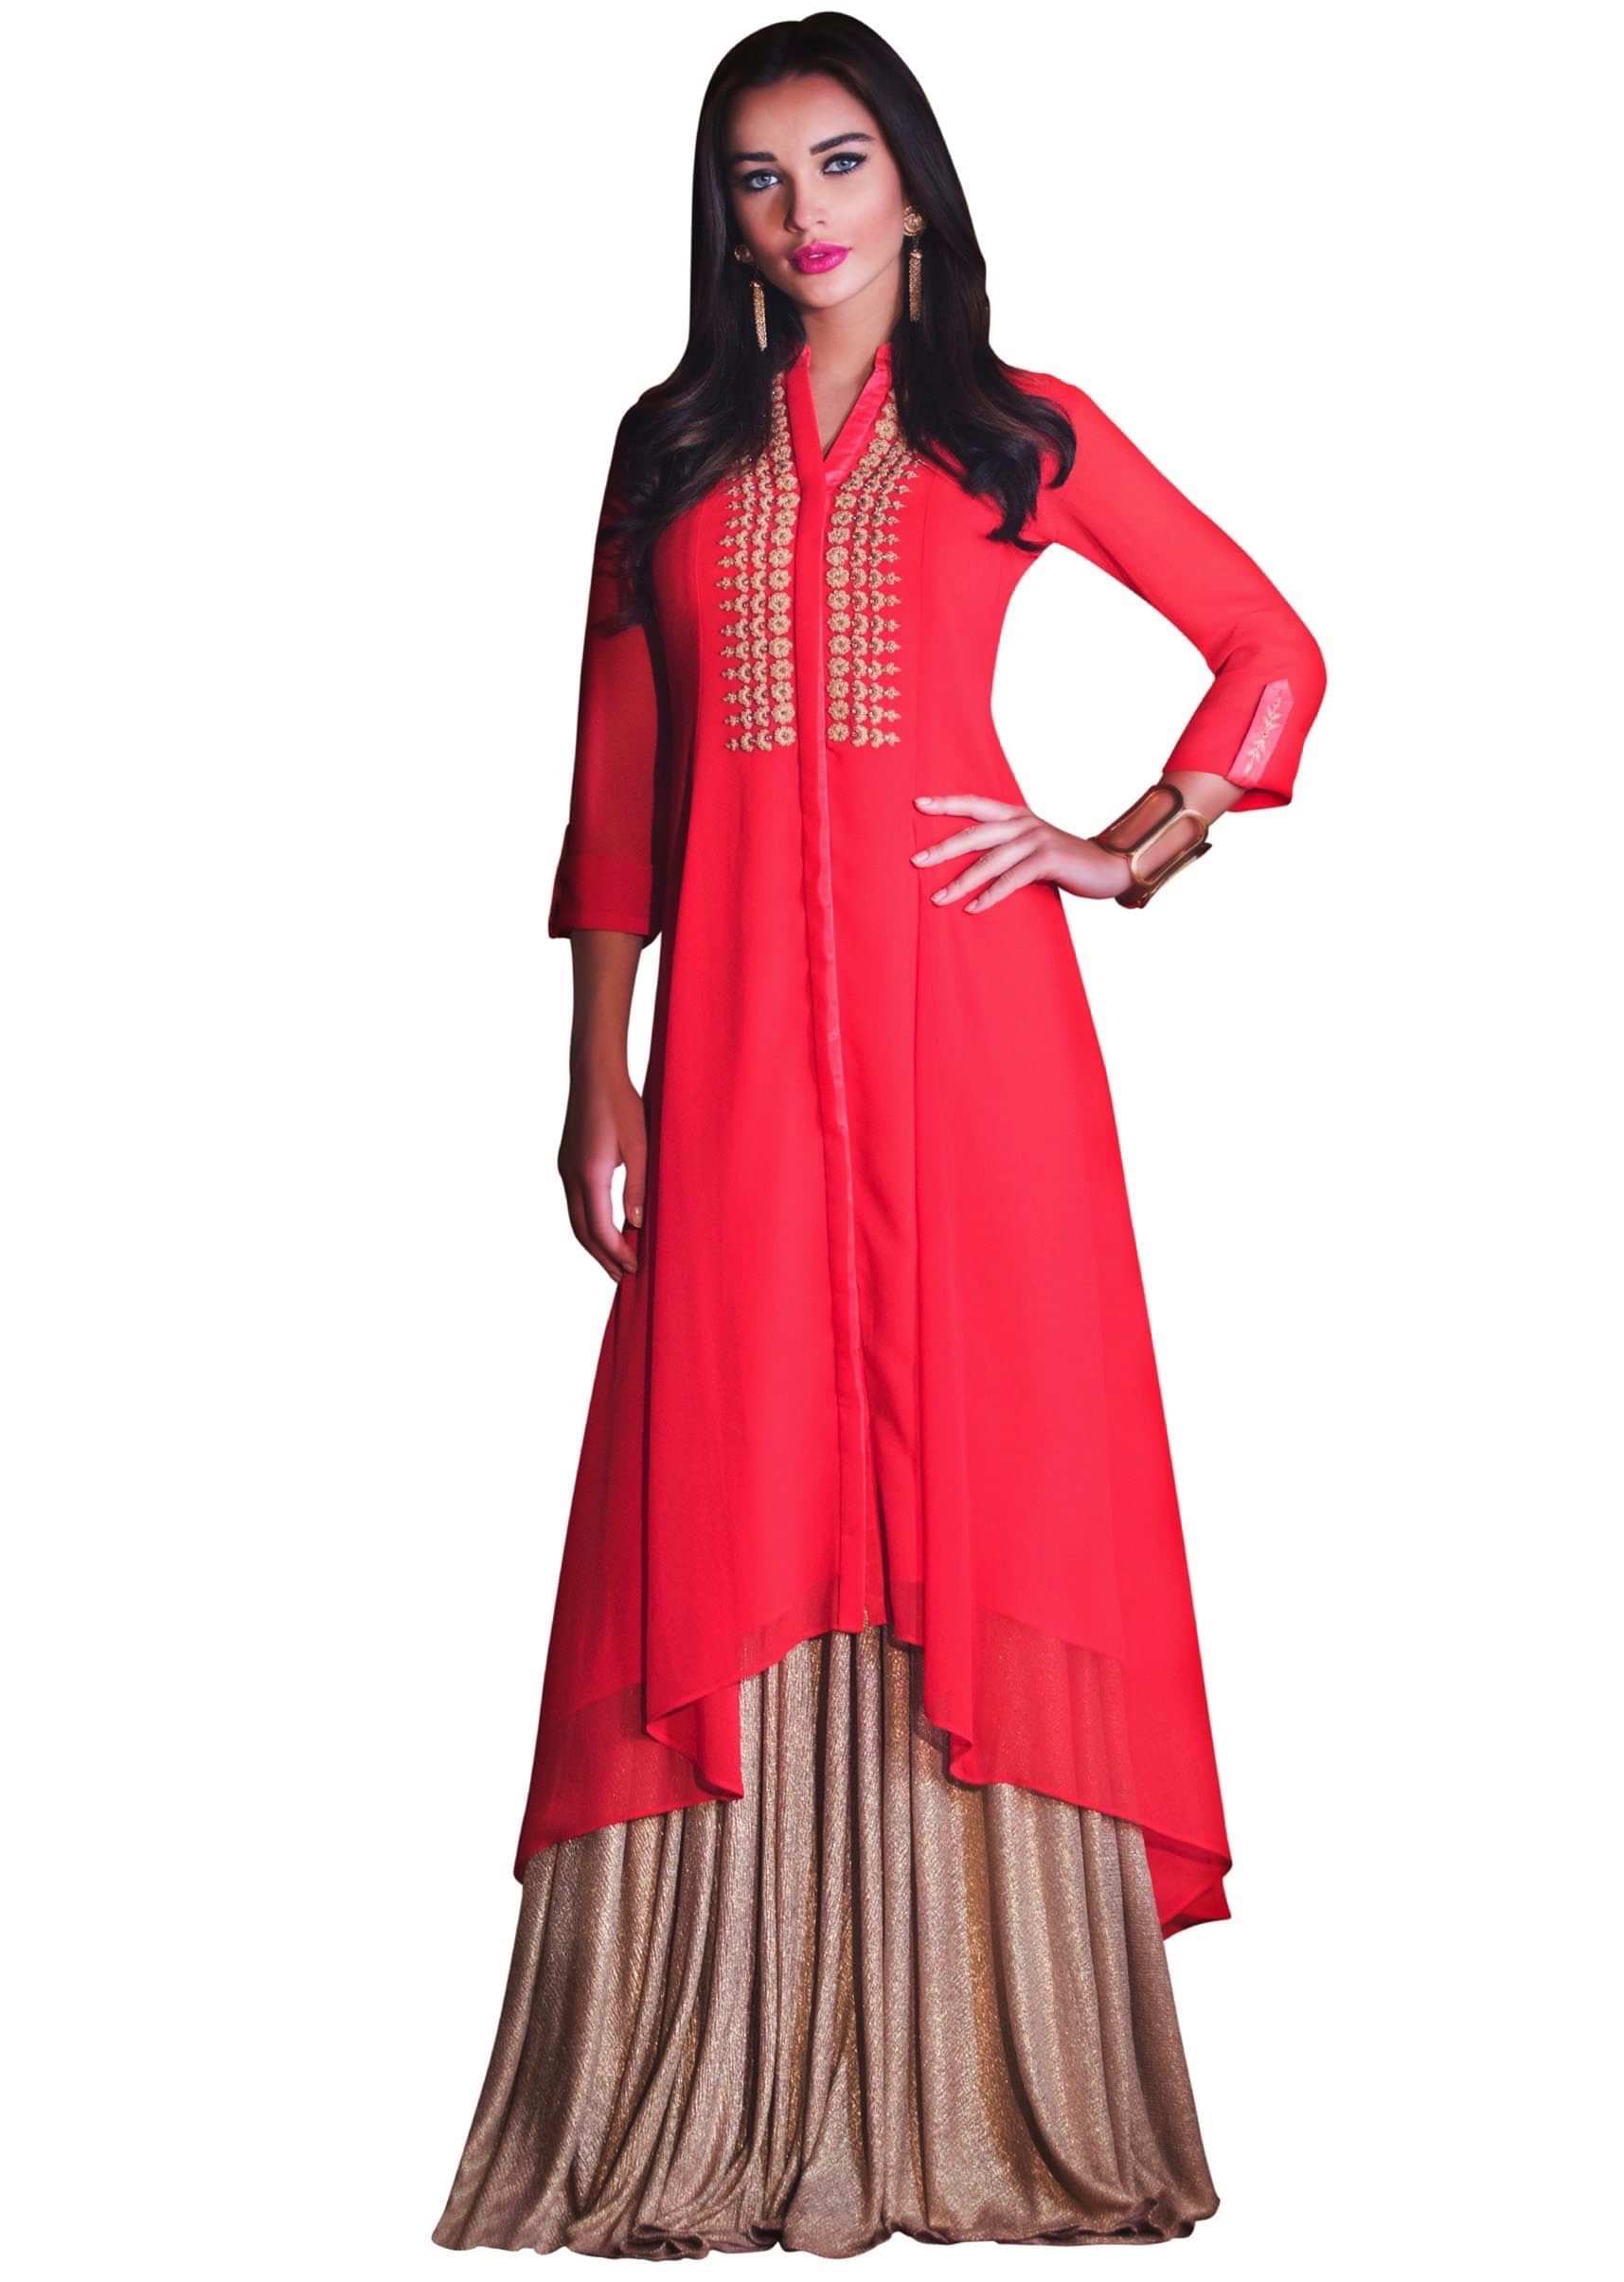 Coral Peach Fancy Kurti With Thread Embroidered Placket Online - Kalki Fashion